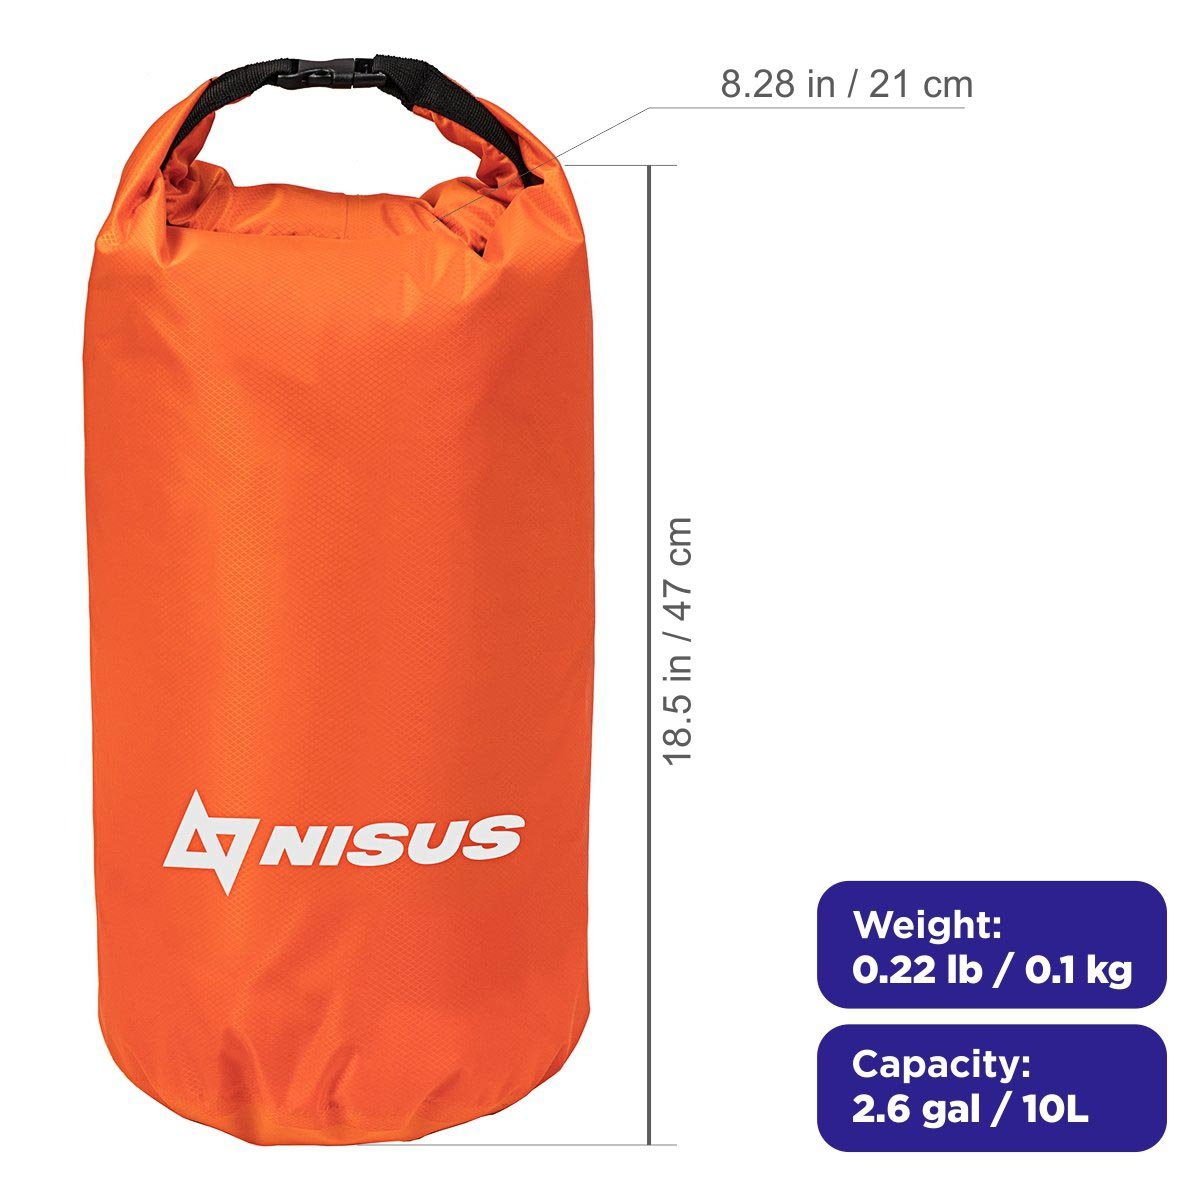 10 L Orange Polyester Waterproof Dry Bag for Fishing, Kayaking is 18.5 inches high, weighing 0.22 lbs